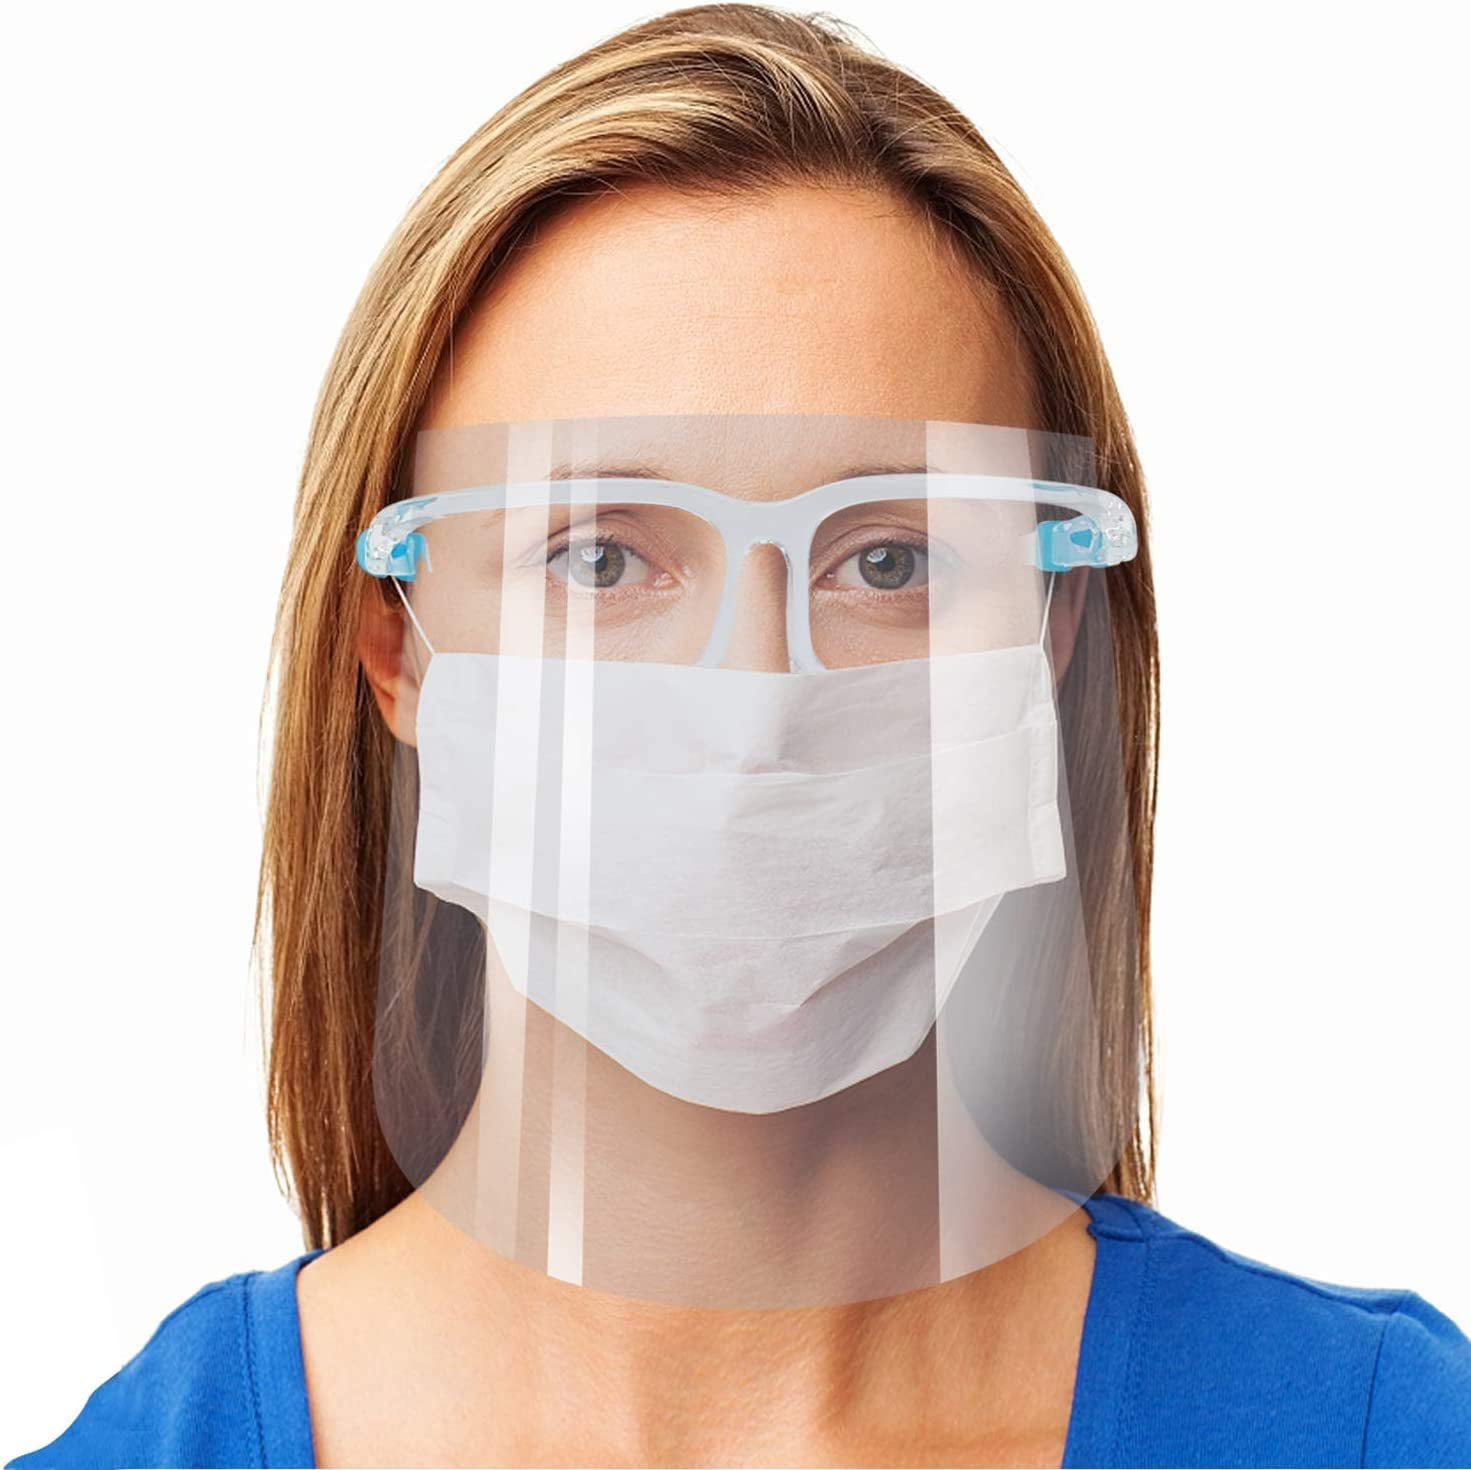 Fast Shipping 5PC Face Shield w/Glasses Fits Over Glasses-AntiFog Reuseable 